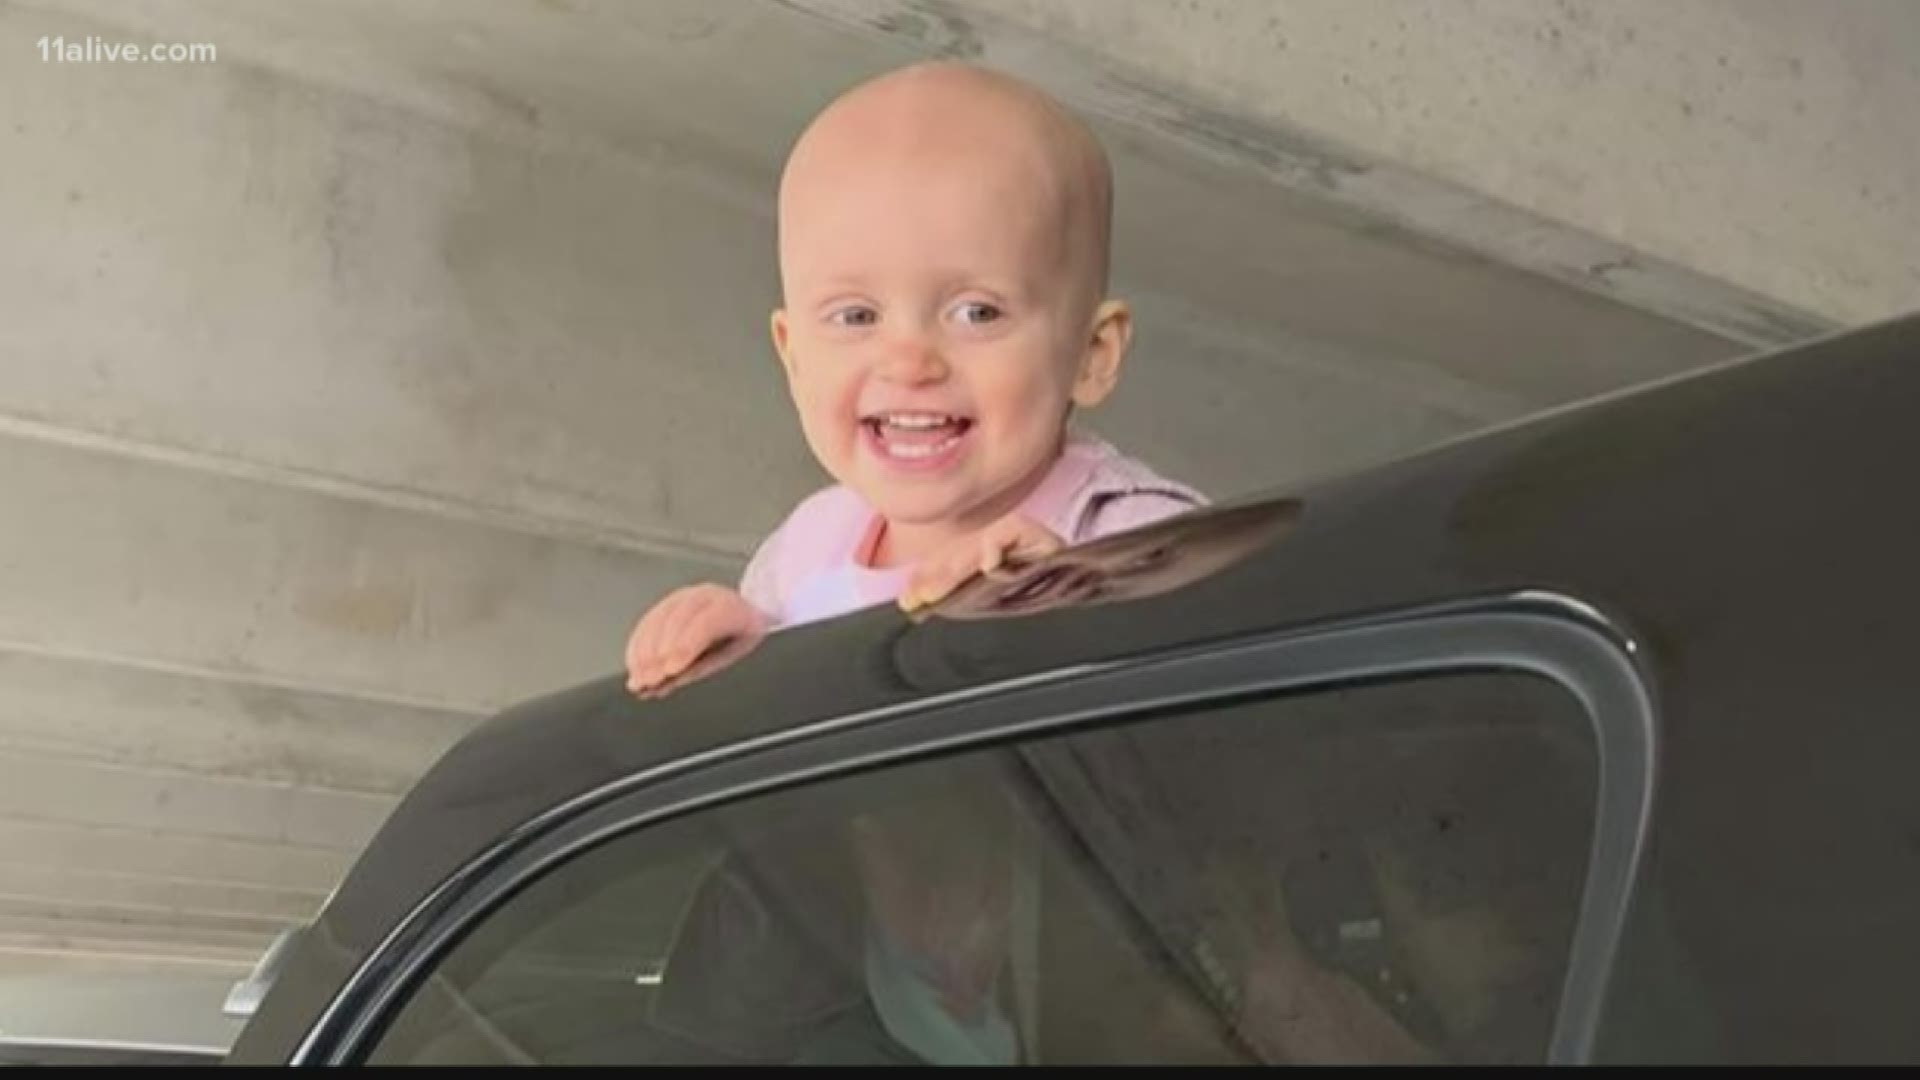 The family of a 1-year-old cancer patient, who had precious items stolen from their car while in Atlanta for treatment, has gotten some of their things back.